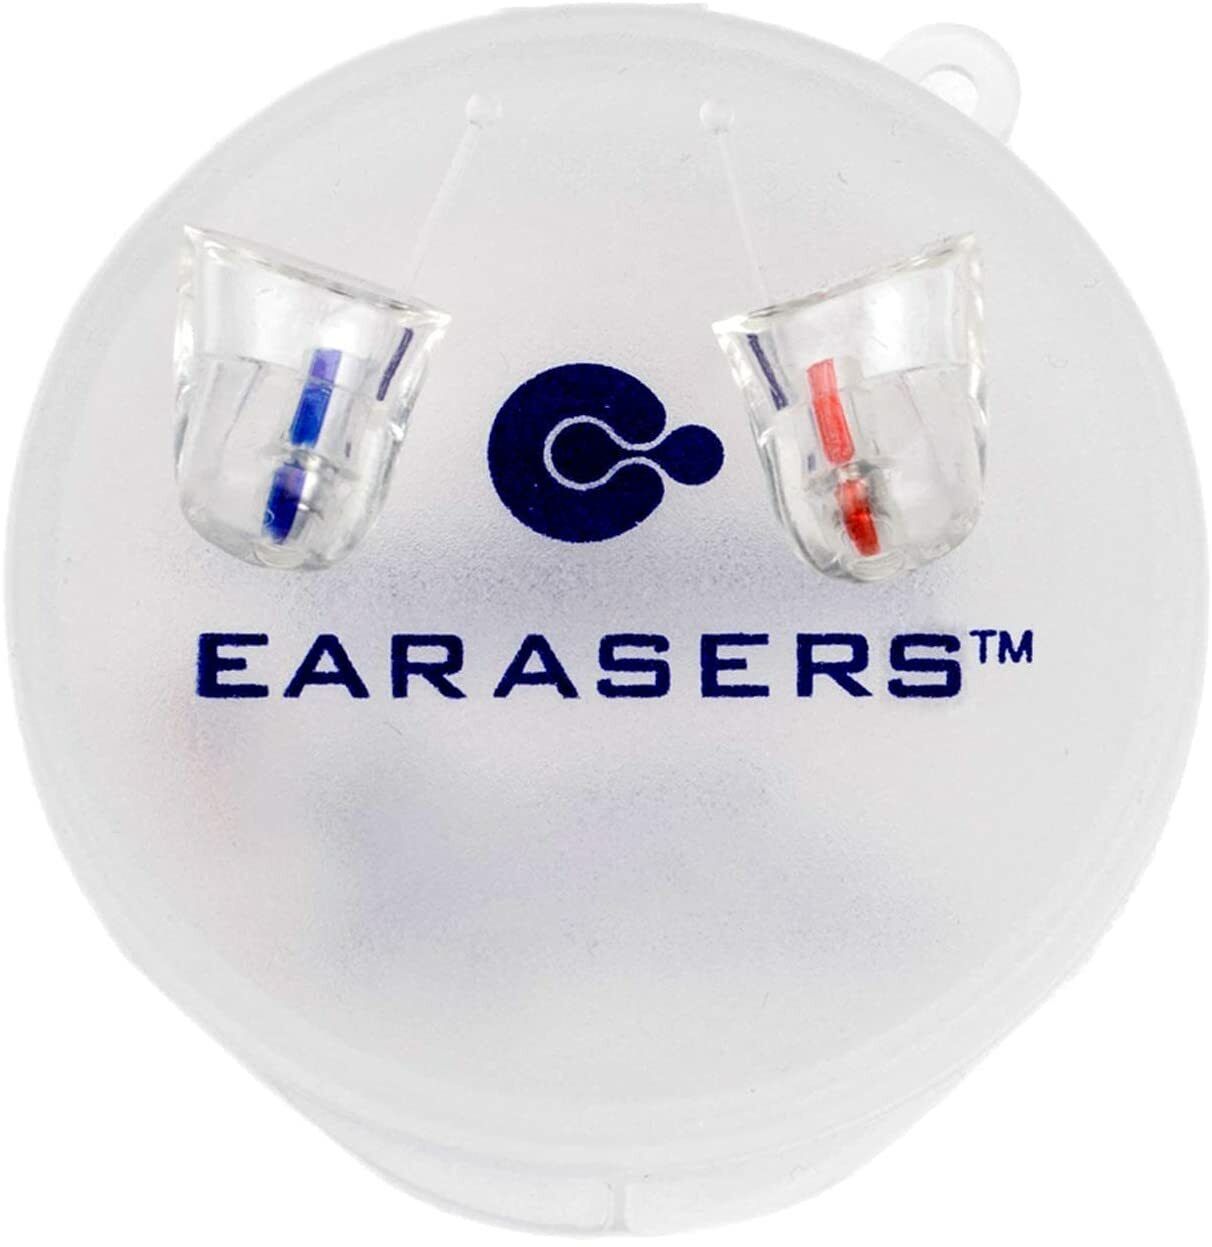 Earasers Hifi Max Comfortable Lightweight Hearing Protection Noise (sanitized)